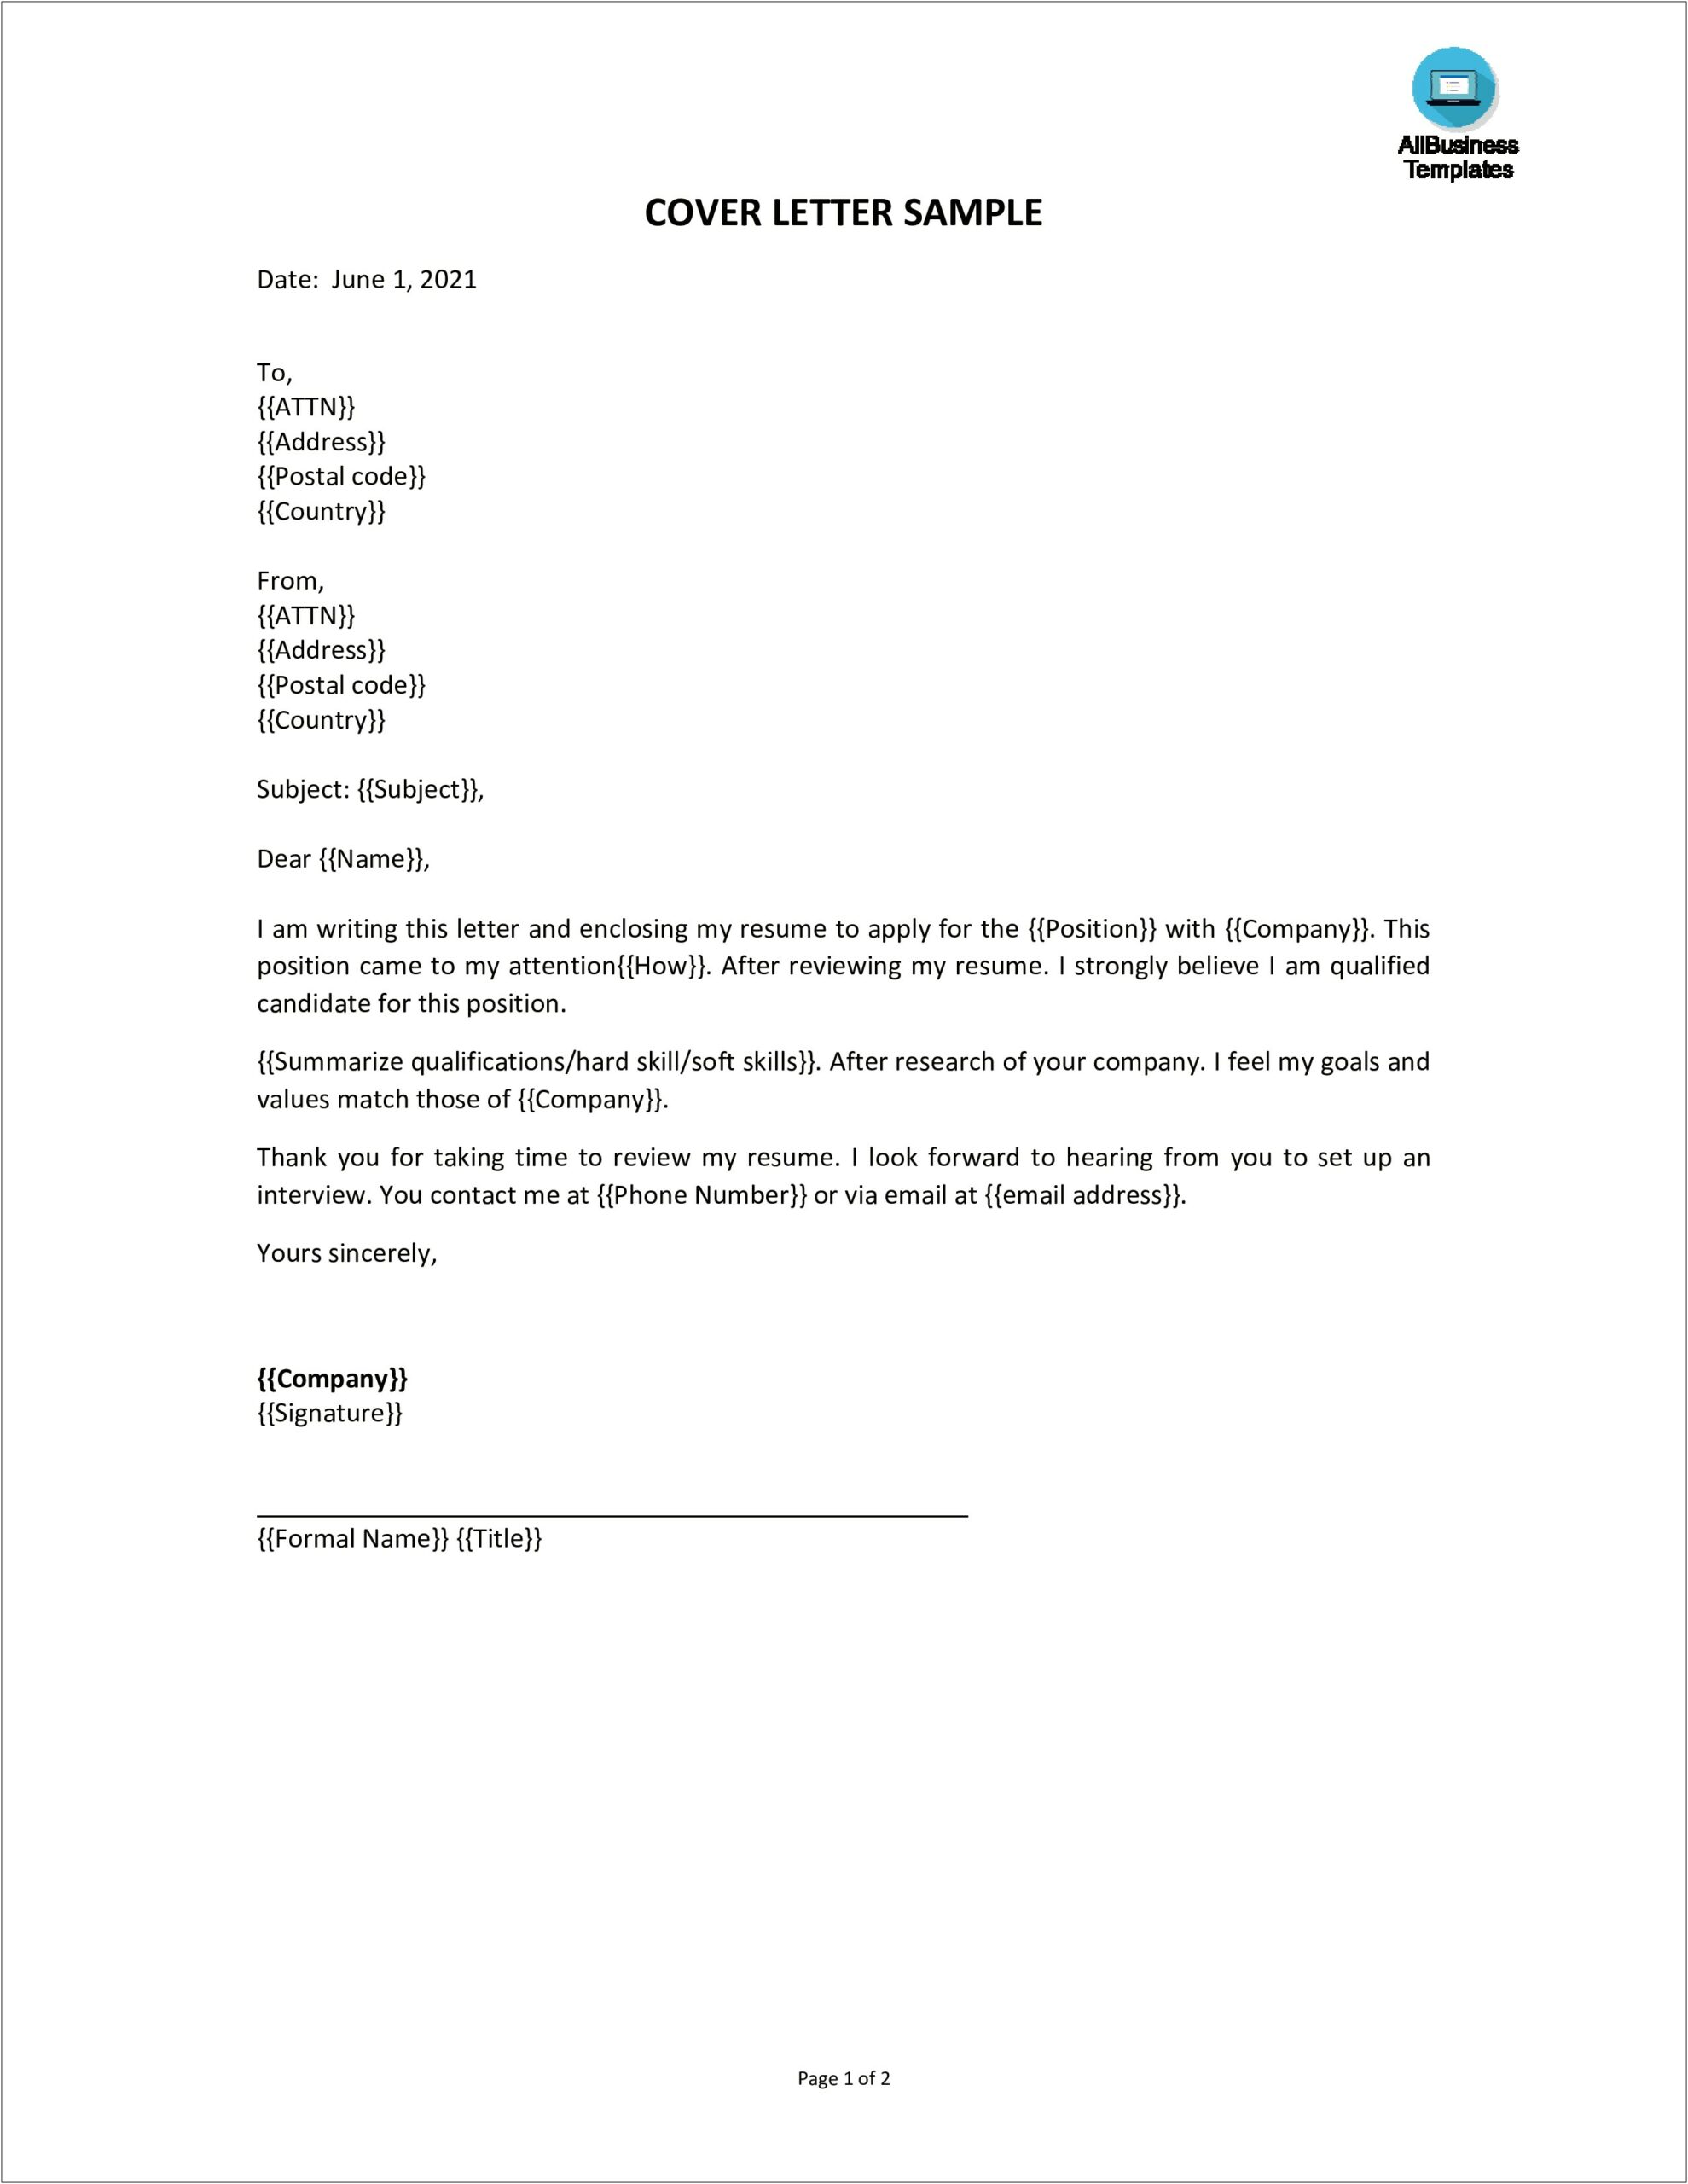 Examples Of Cover Letter For Resume Pdf